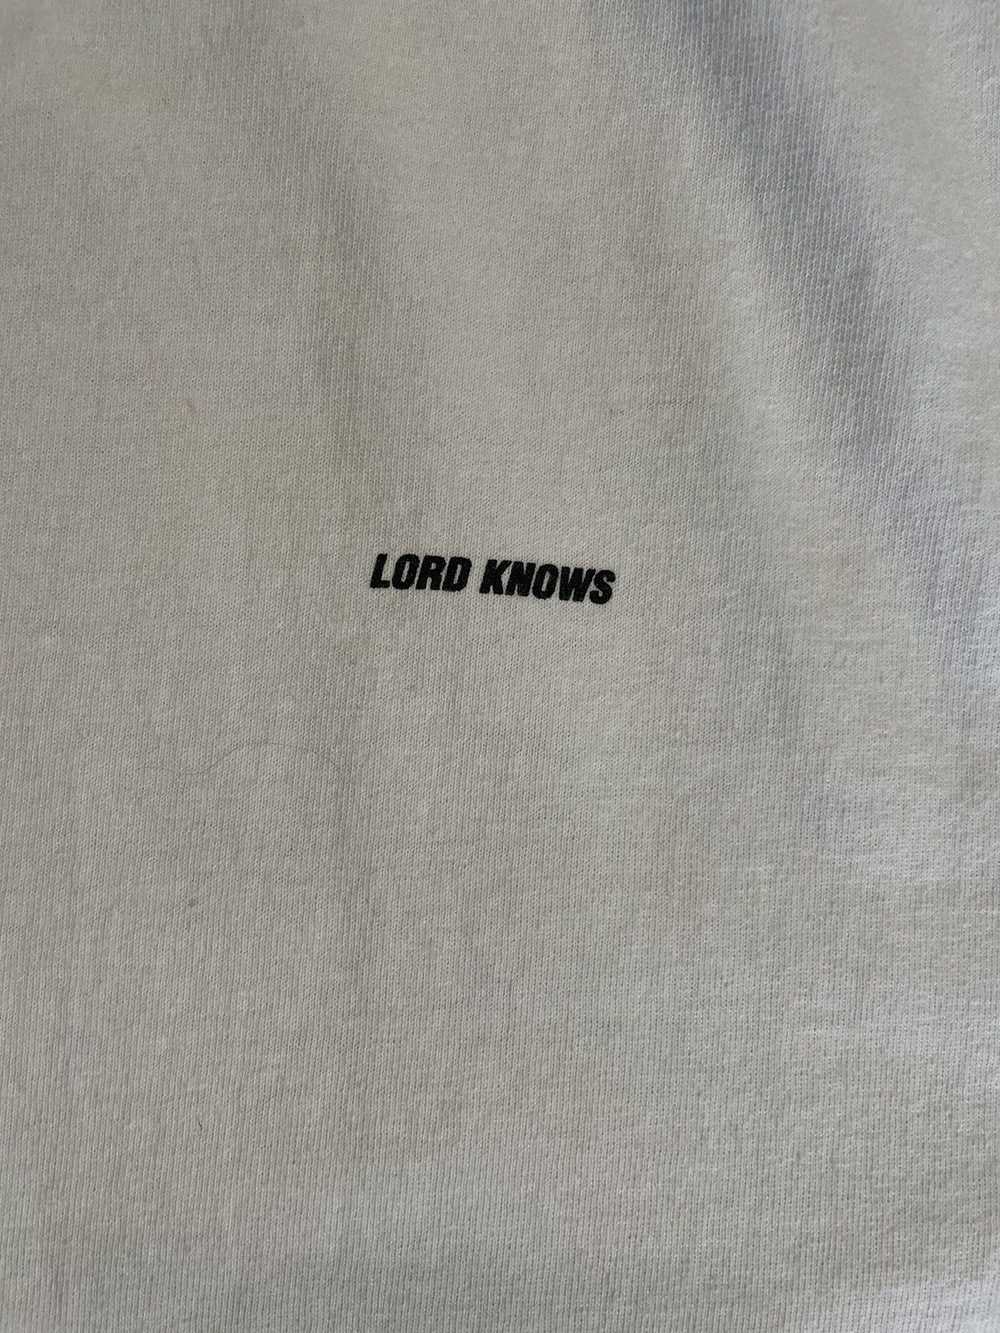 Lxrdknows × Streetwear Lord Knows Prophet Roulett… - image 8